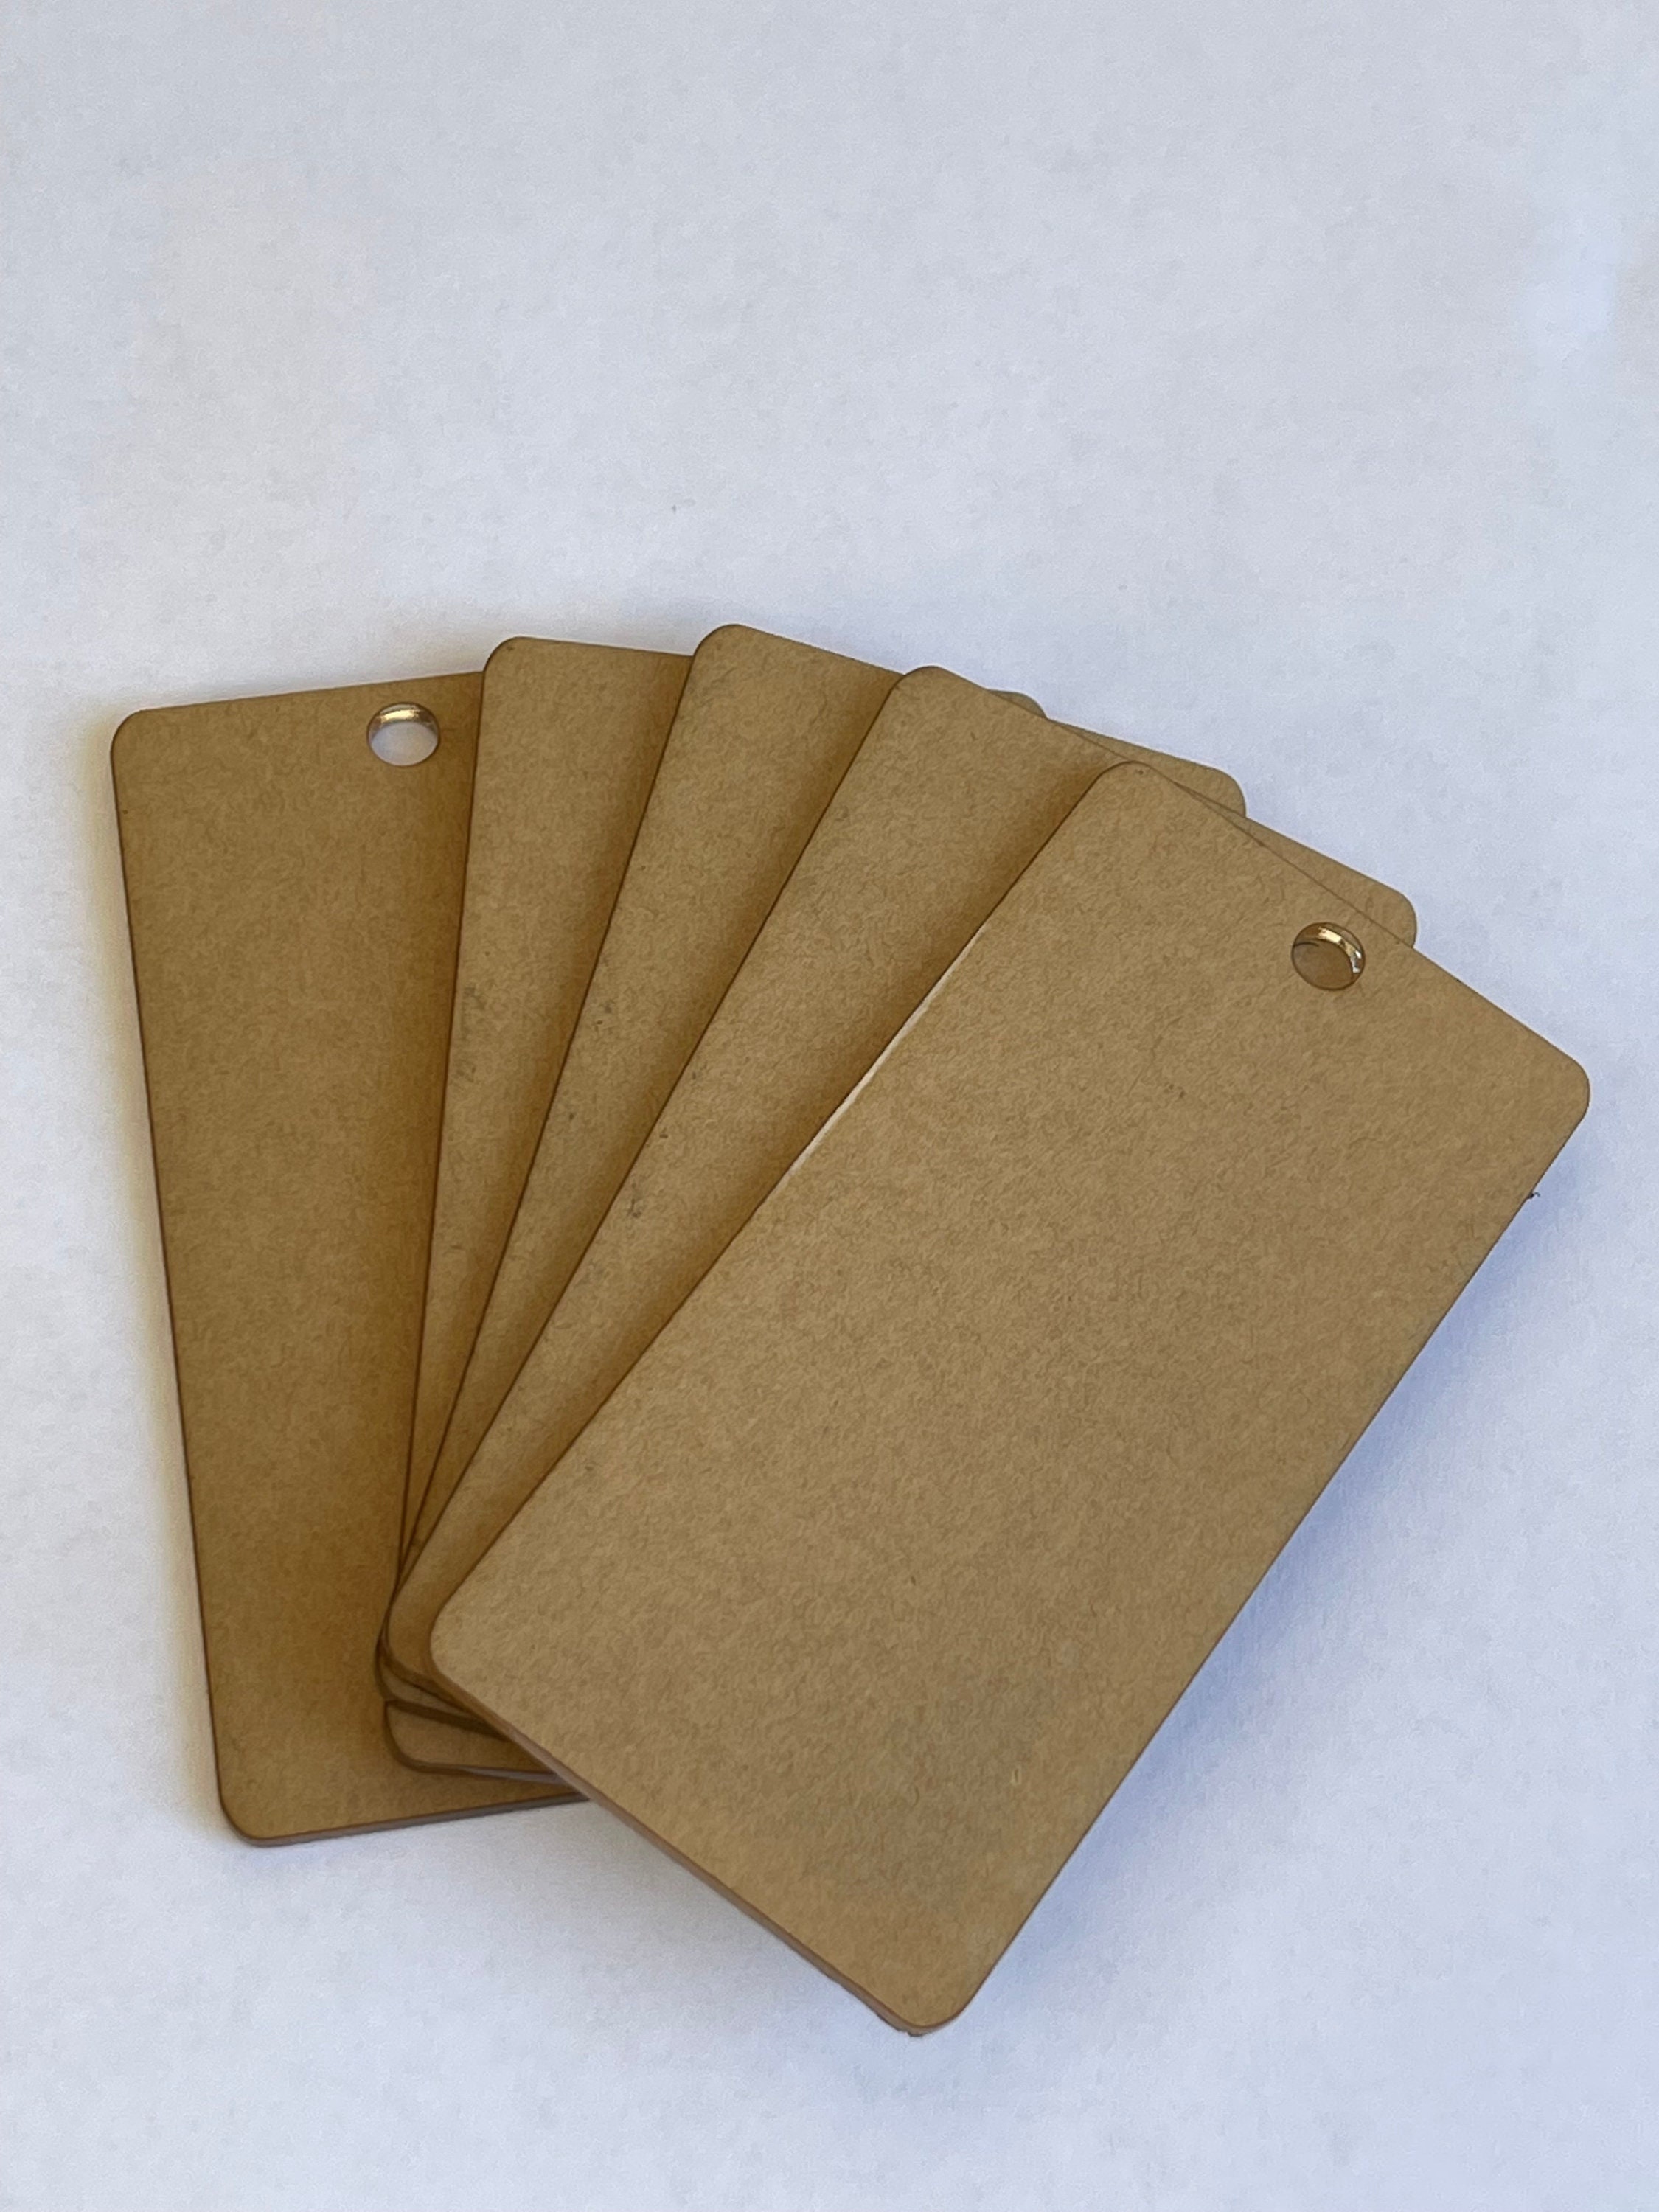 Luggage Tags Leather - Blank Natural Leather Tags Tooling Ready - Decorate  Your Own Unique Luggage T…See more Luggage Tags Leather - Blank Natural